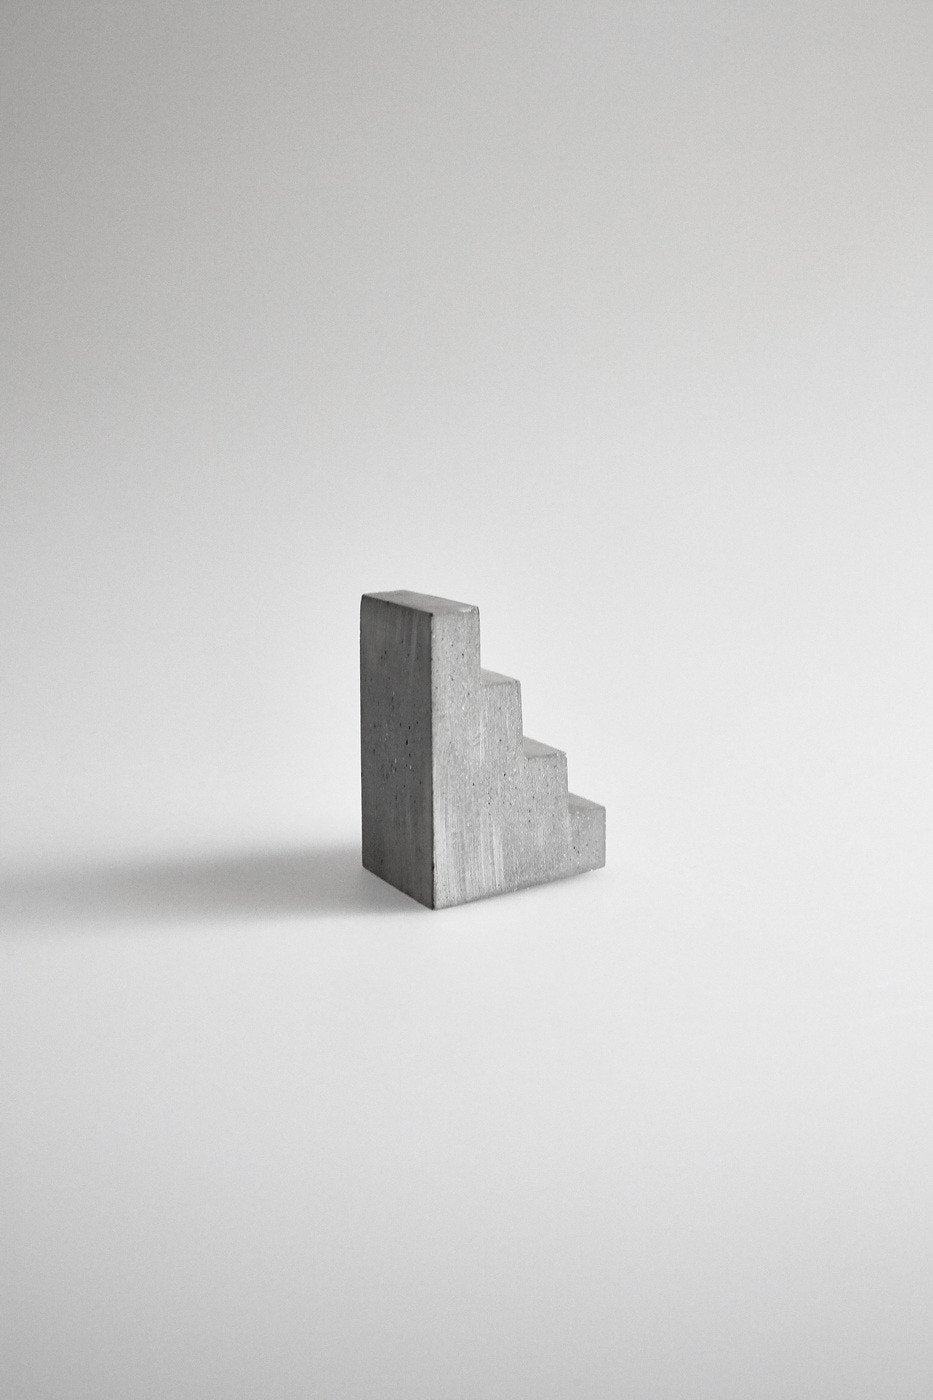 Studiokyss - Concrete Staircase Paperweight